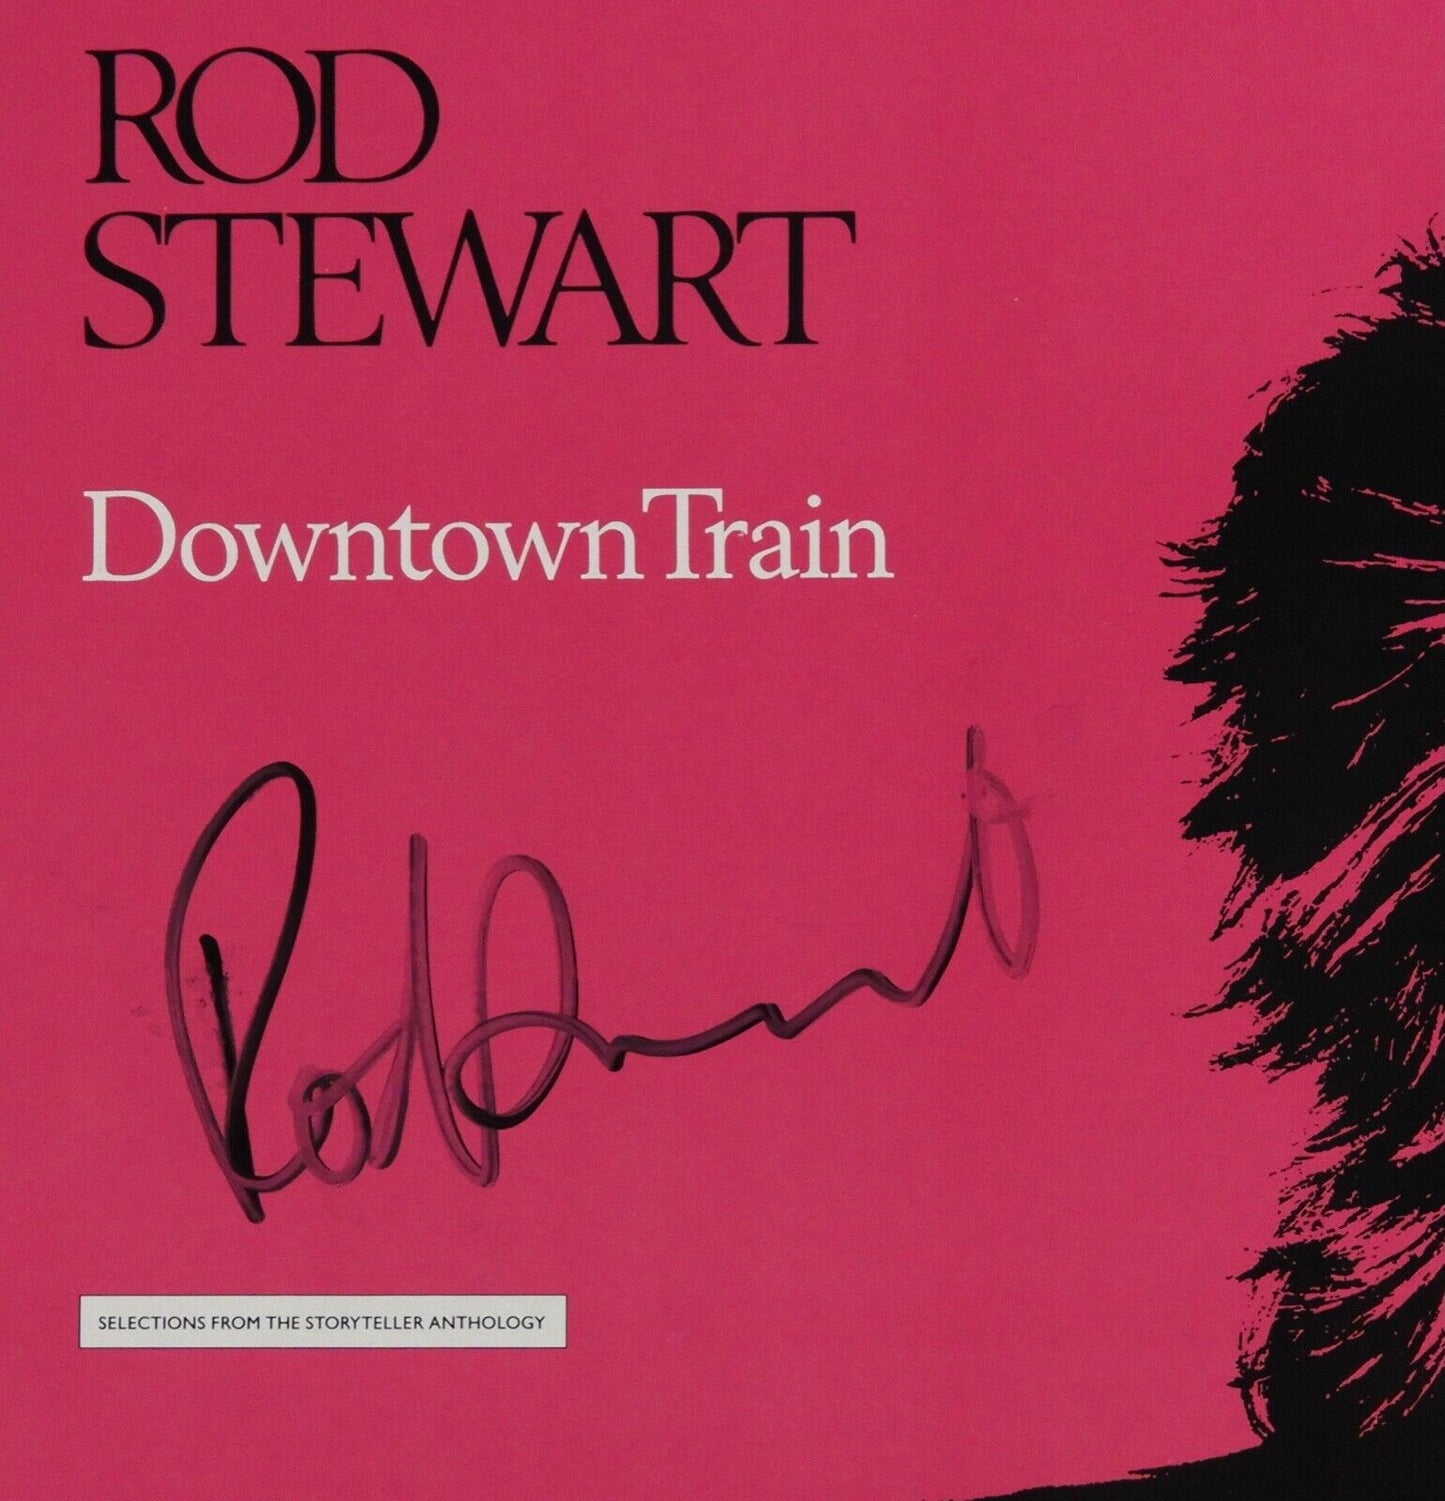 Rod Stewart Signed JSA Signed Autograph Album Record Downtown Train